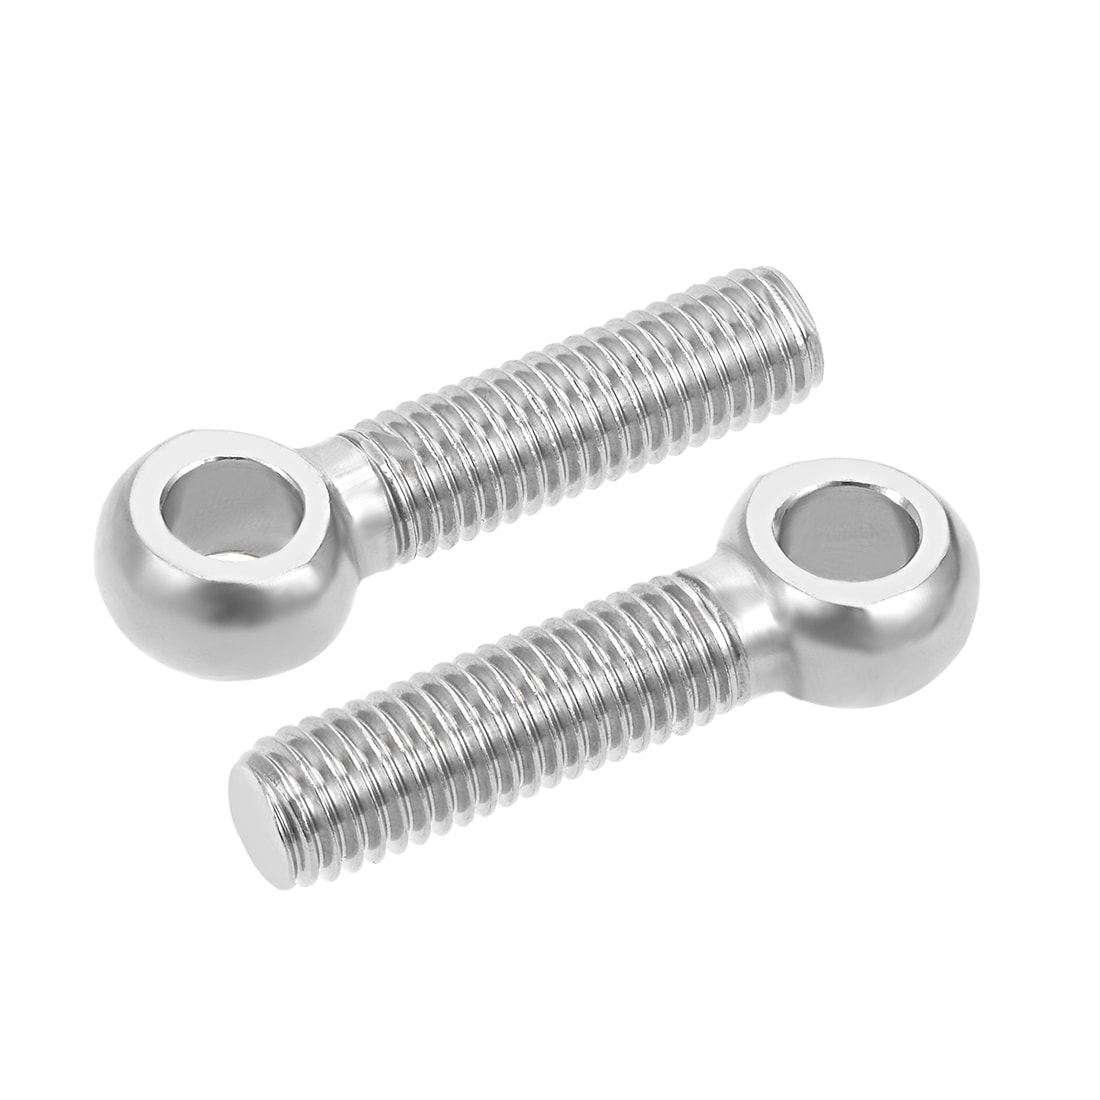 uxcell M6 x 30mm 304 Stainless Steel Machine Shoulder Lift Eye Bolt Rigging 10pcs Silver Tone 